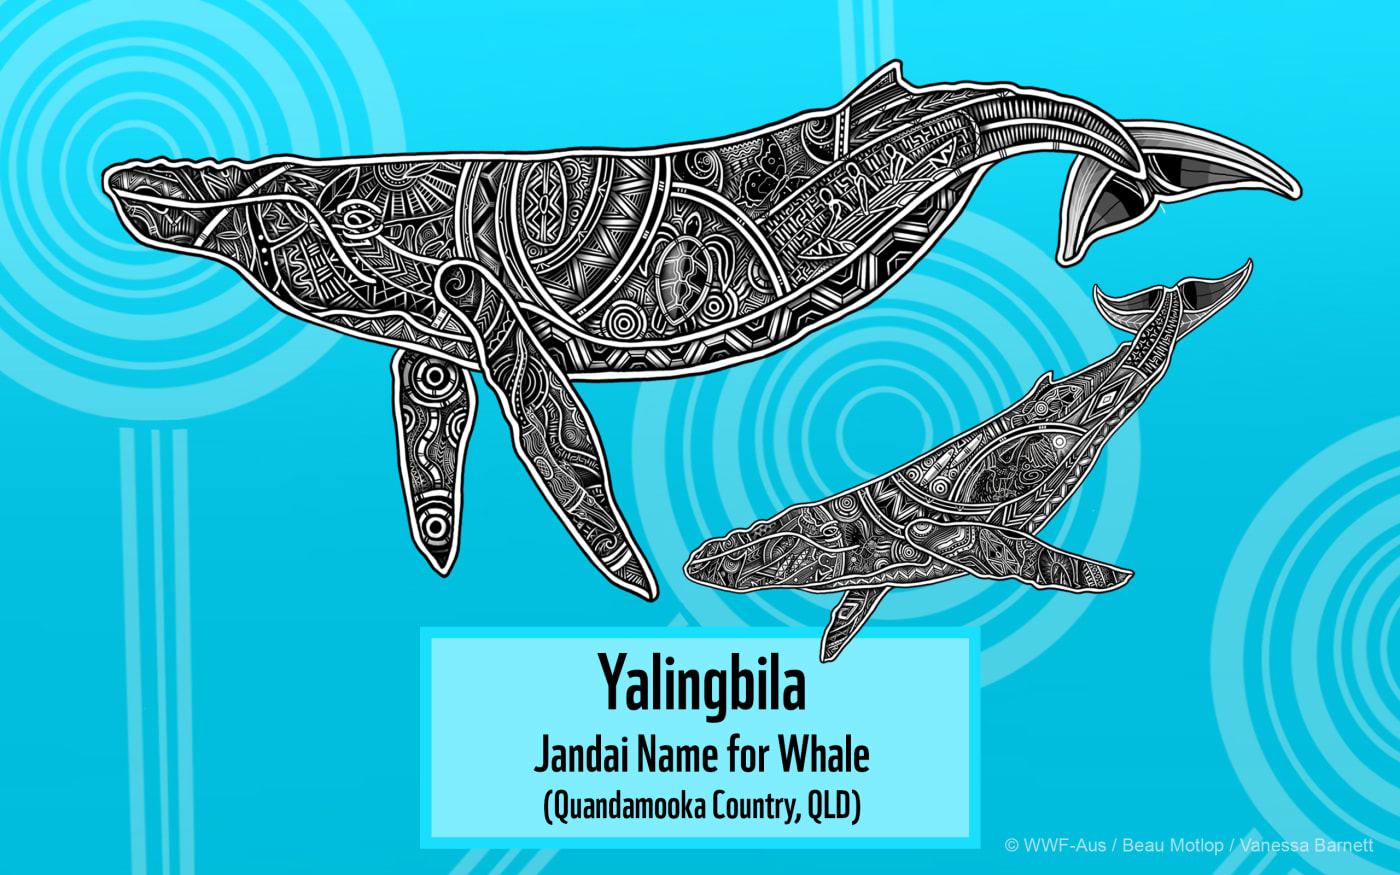 Indigenous Whale or Yalingbila Mother and Calf Art Desktop featuring Jandai Name for Whale (2560x1600)